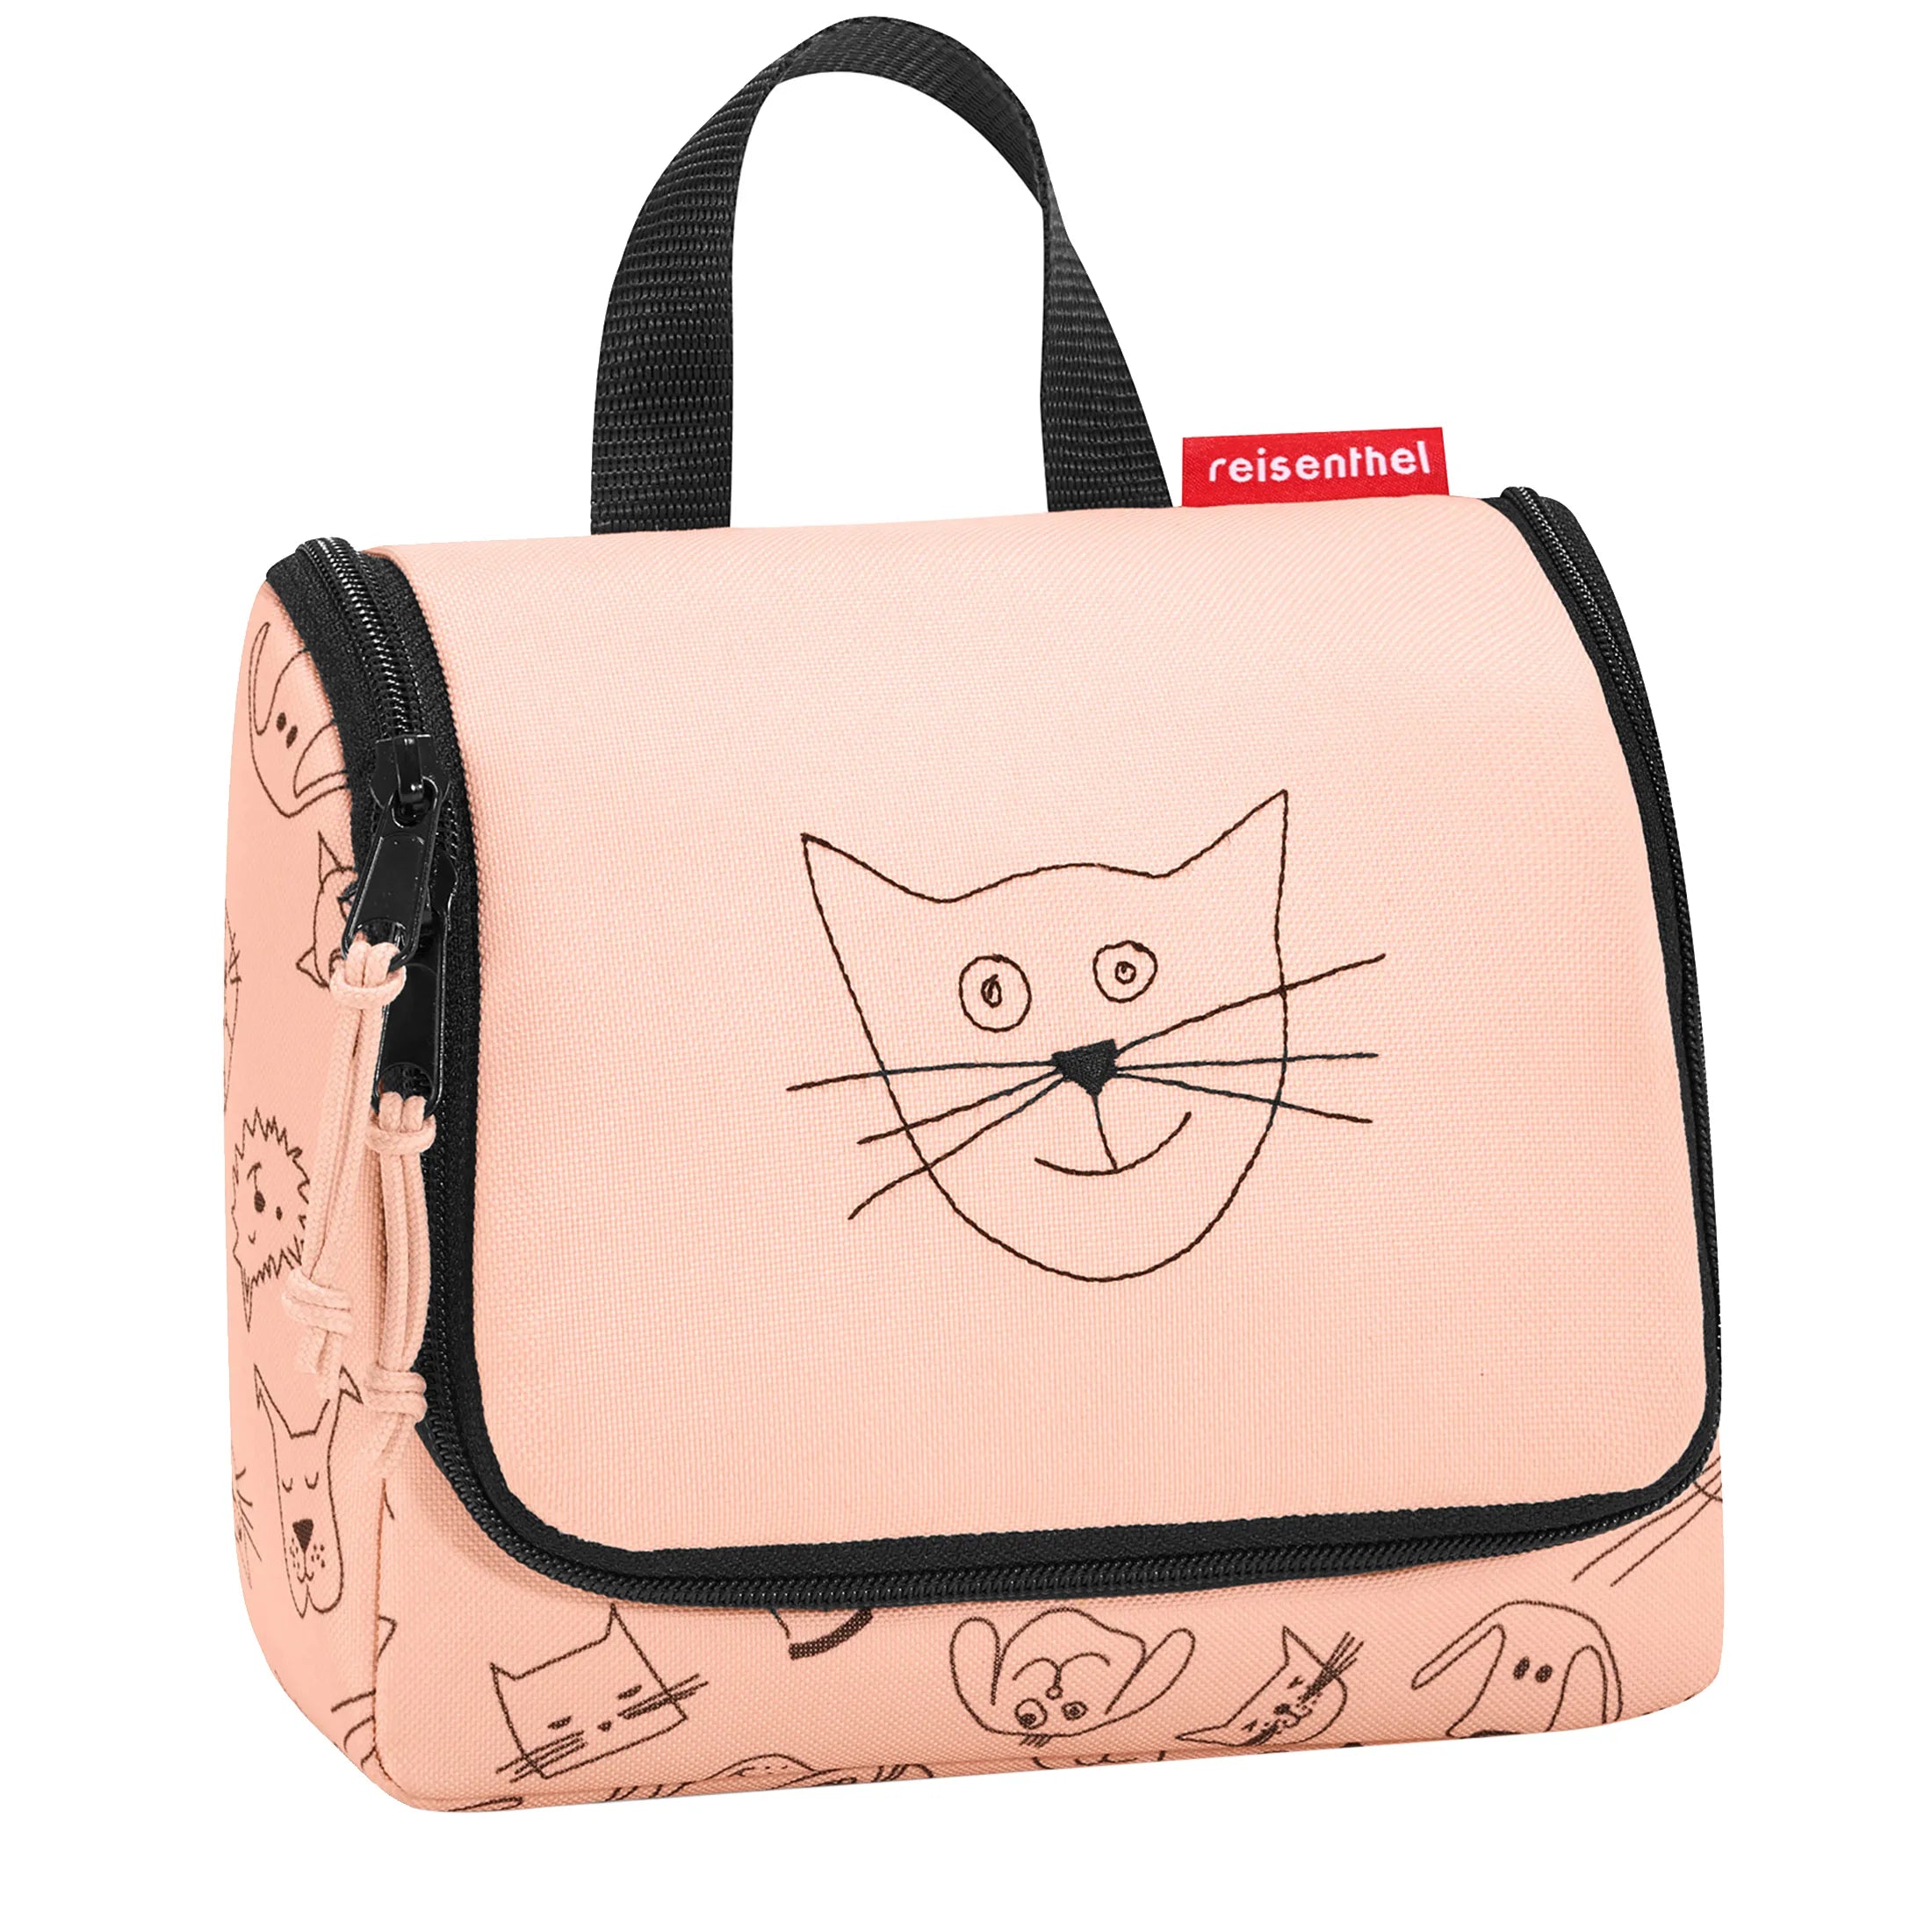 Reisenthel Kids Toiletbag S Kulturbeutel 18 cm - cats and dogs rose